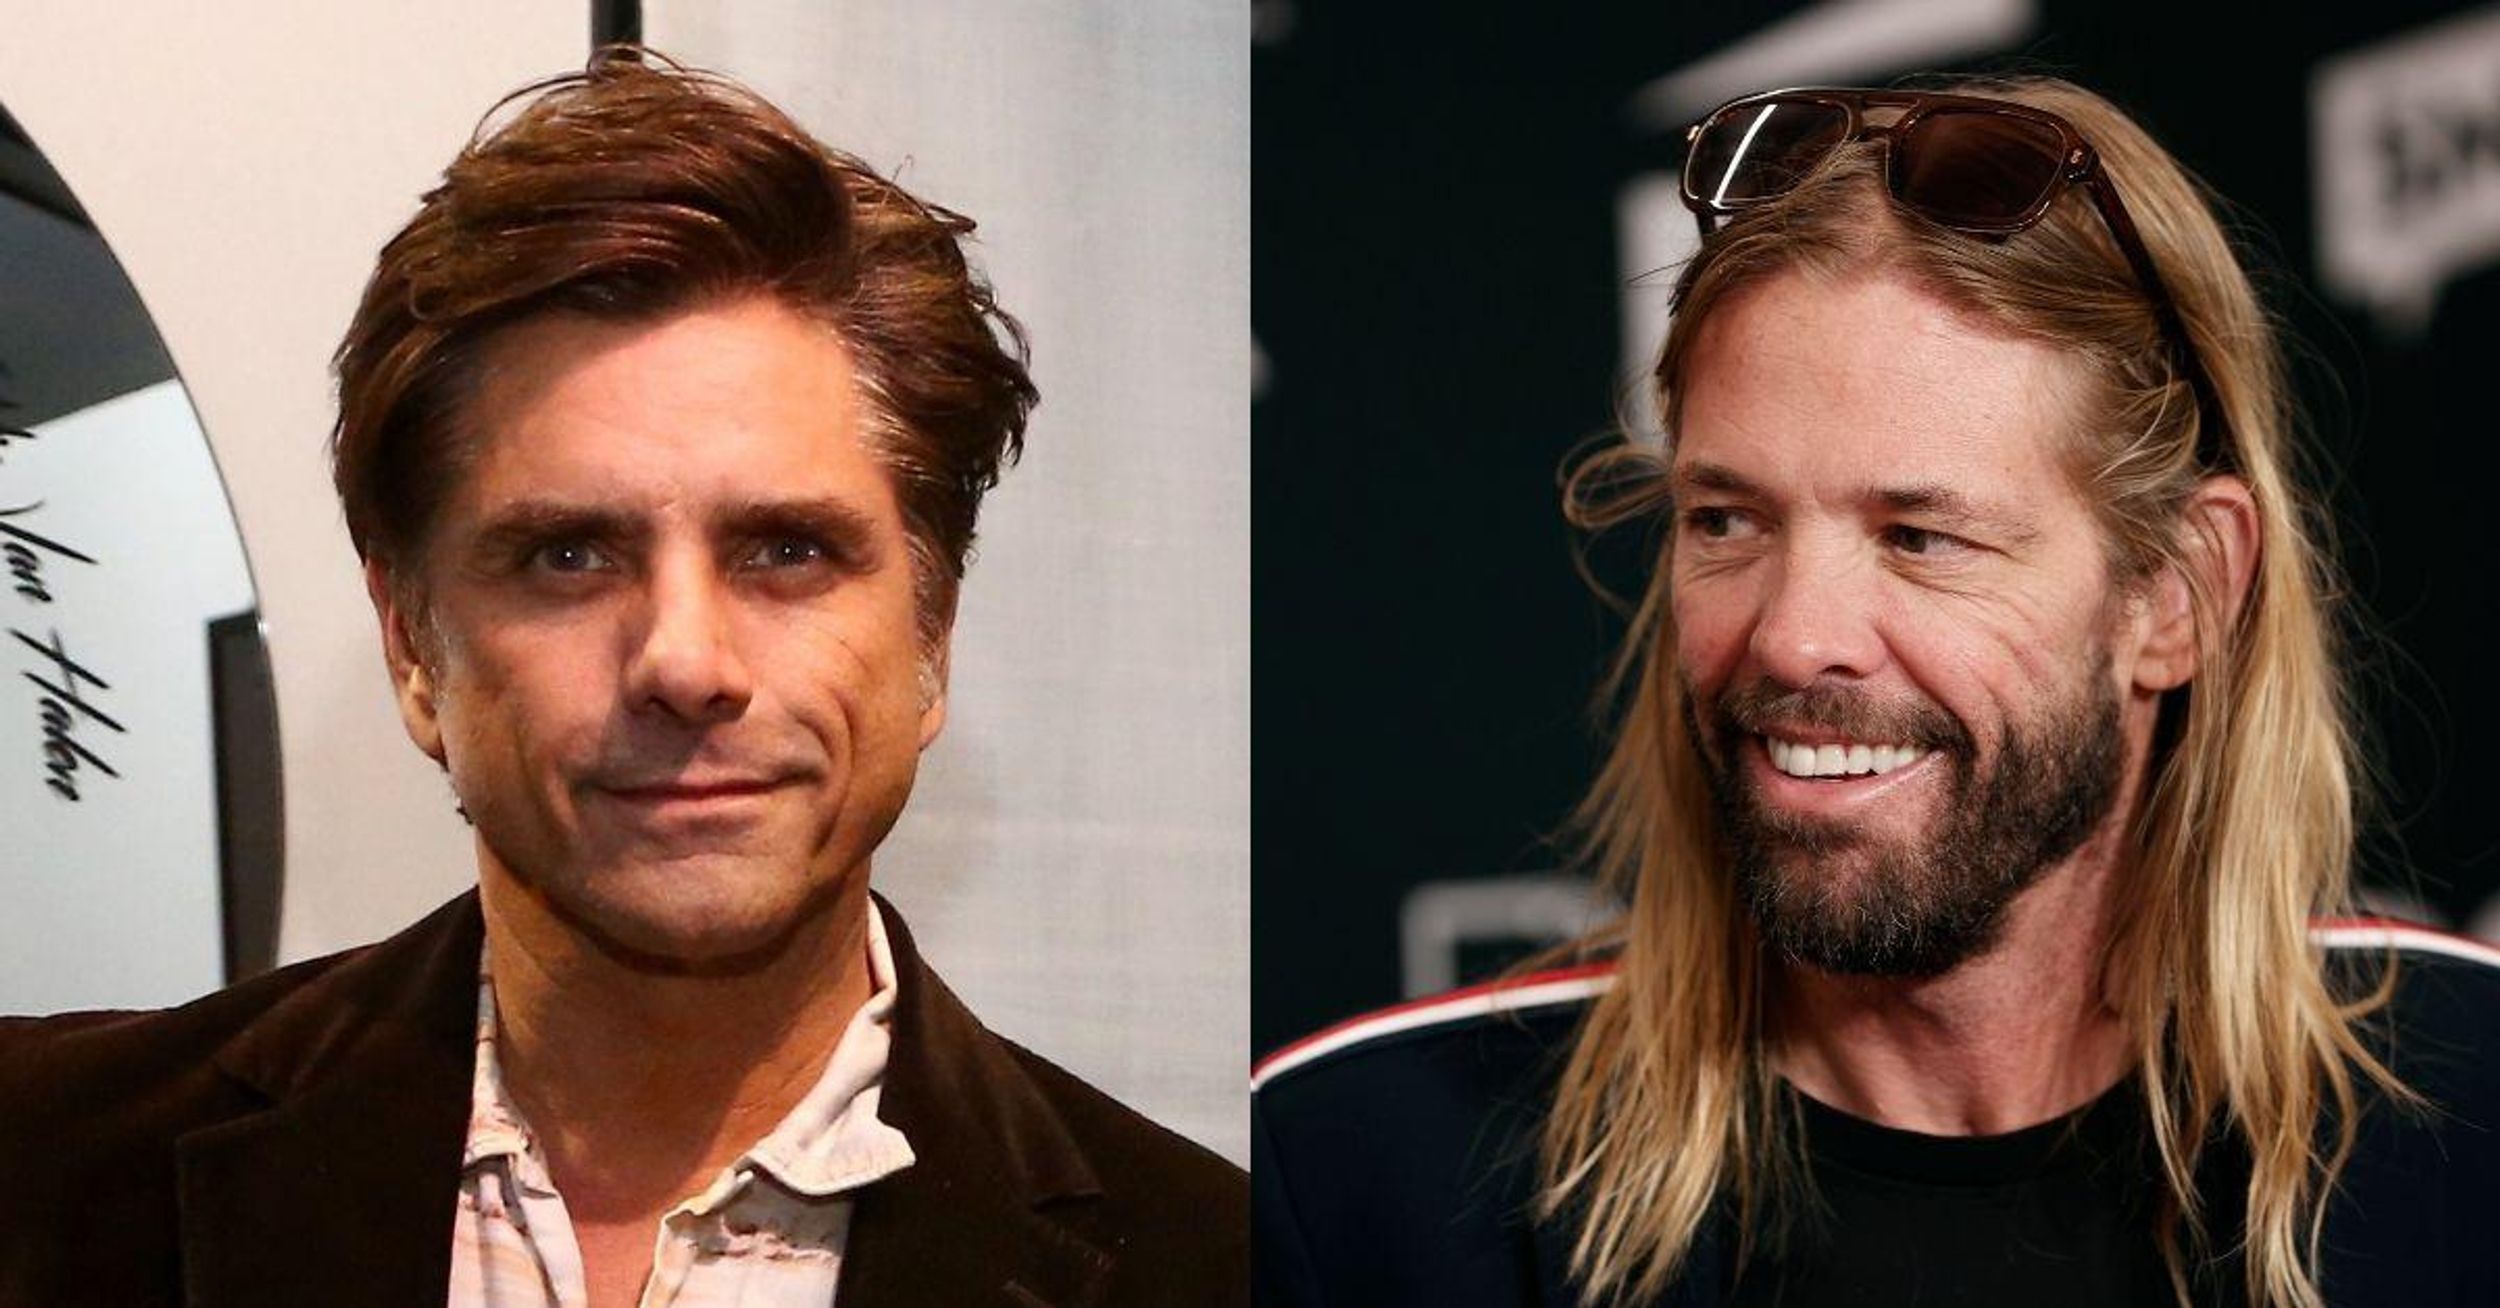 John Stamos Shares Poignant Final Text From Foo Fighters Drummer Taylor Hawkins Before His Death At 50